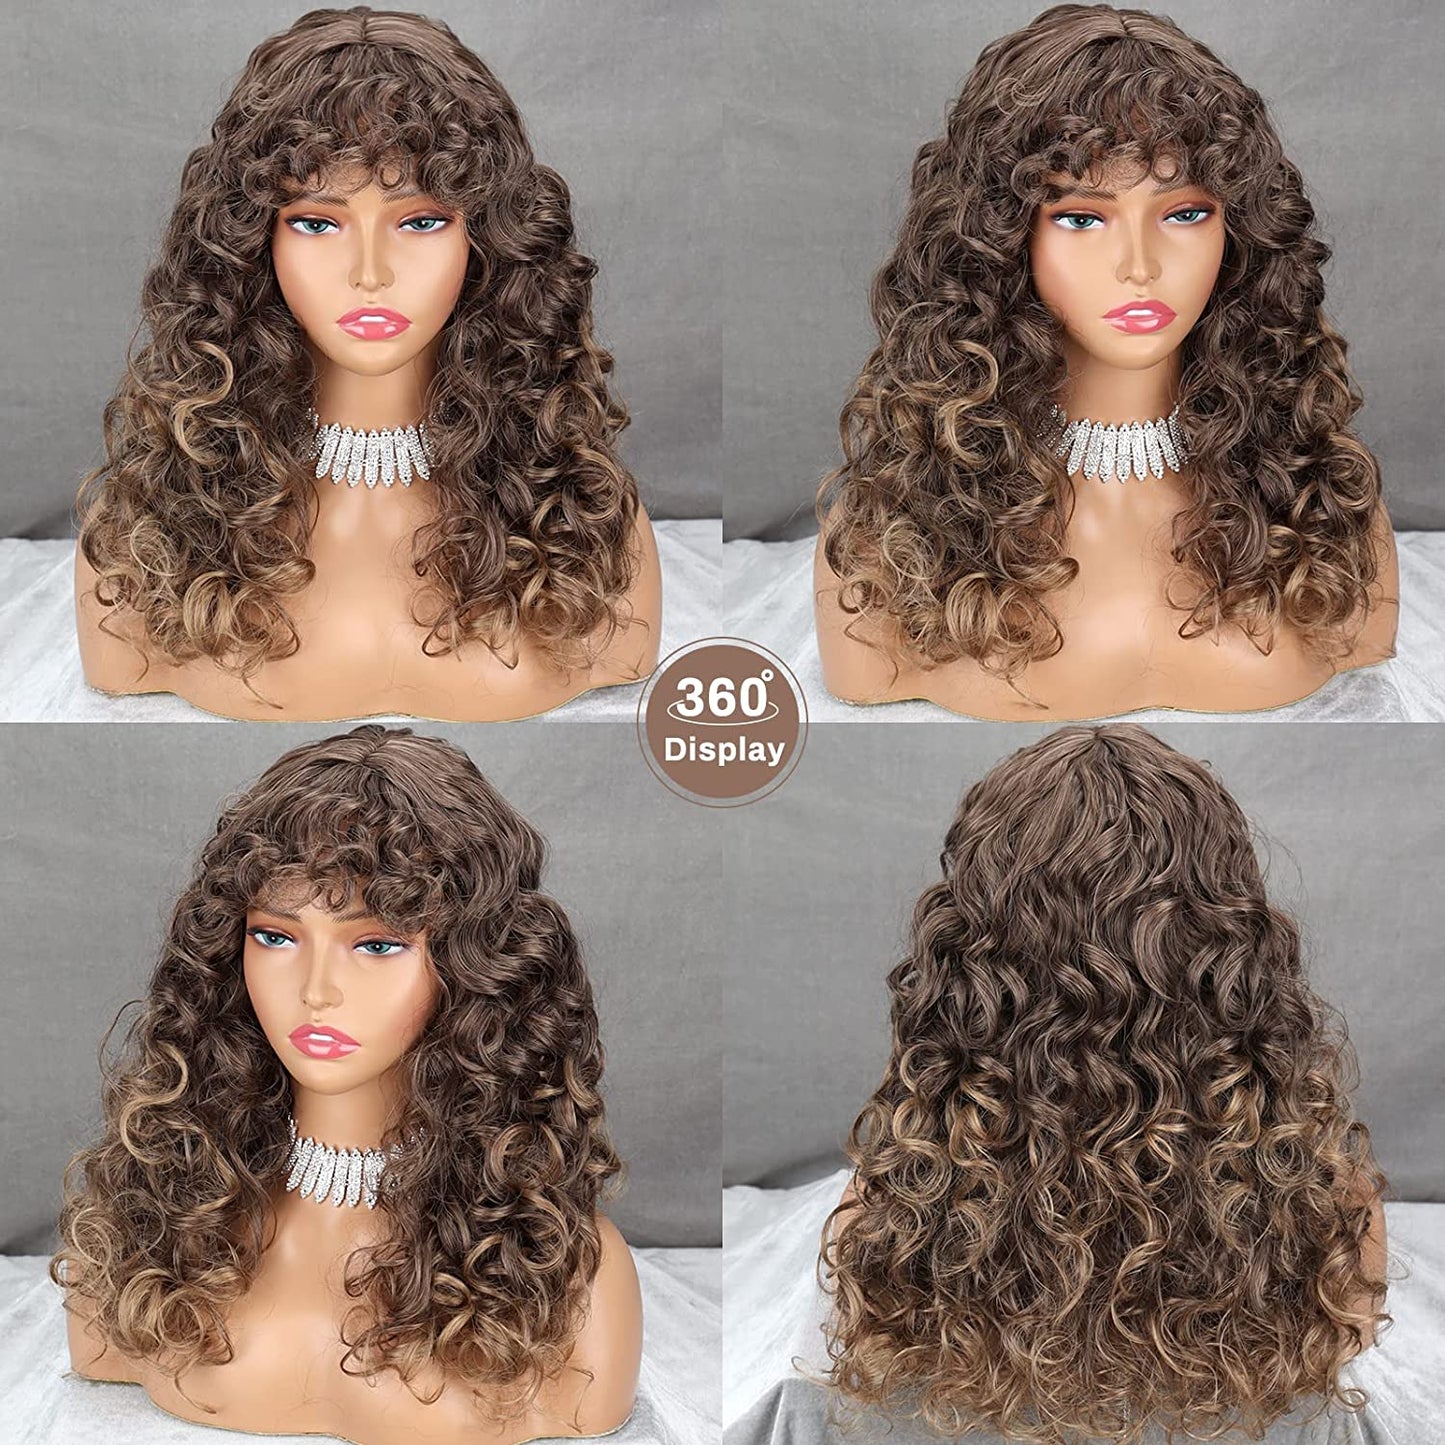 Long Curly Afro Wigs for Black Women, Fluffy Wavy Brown Afro Wig with Bangs, Afro Kinky Curly Big